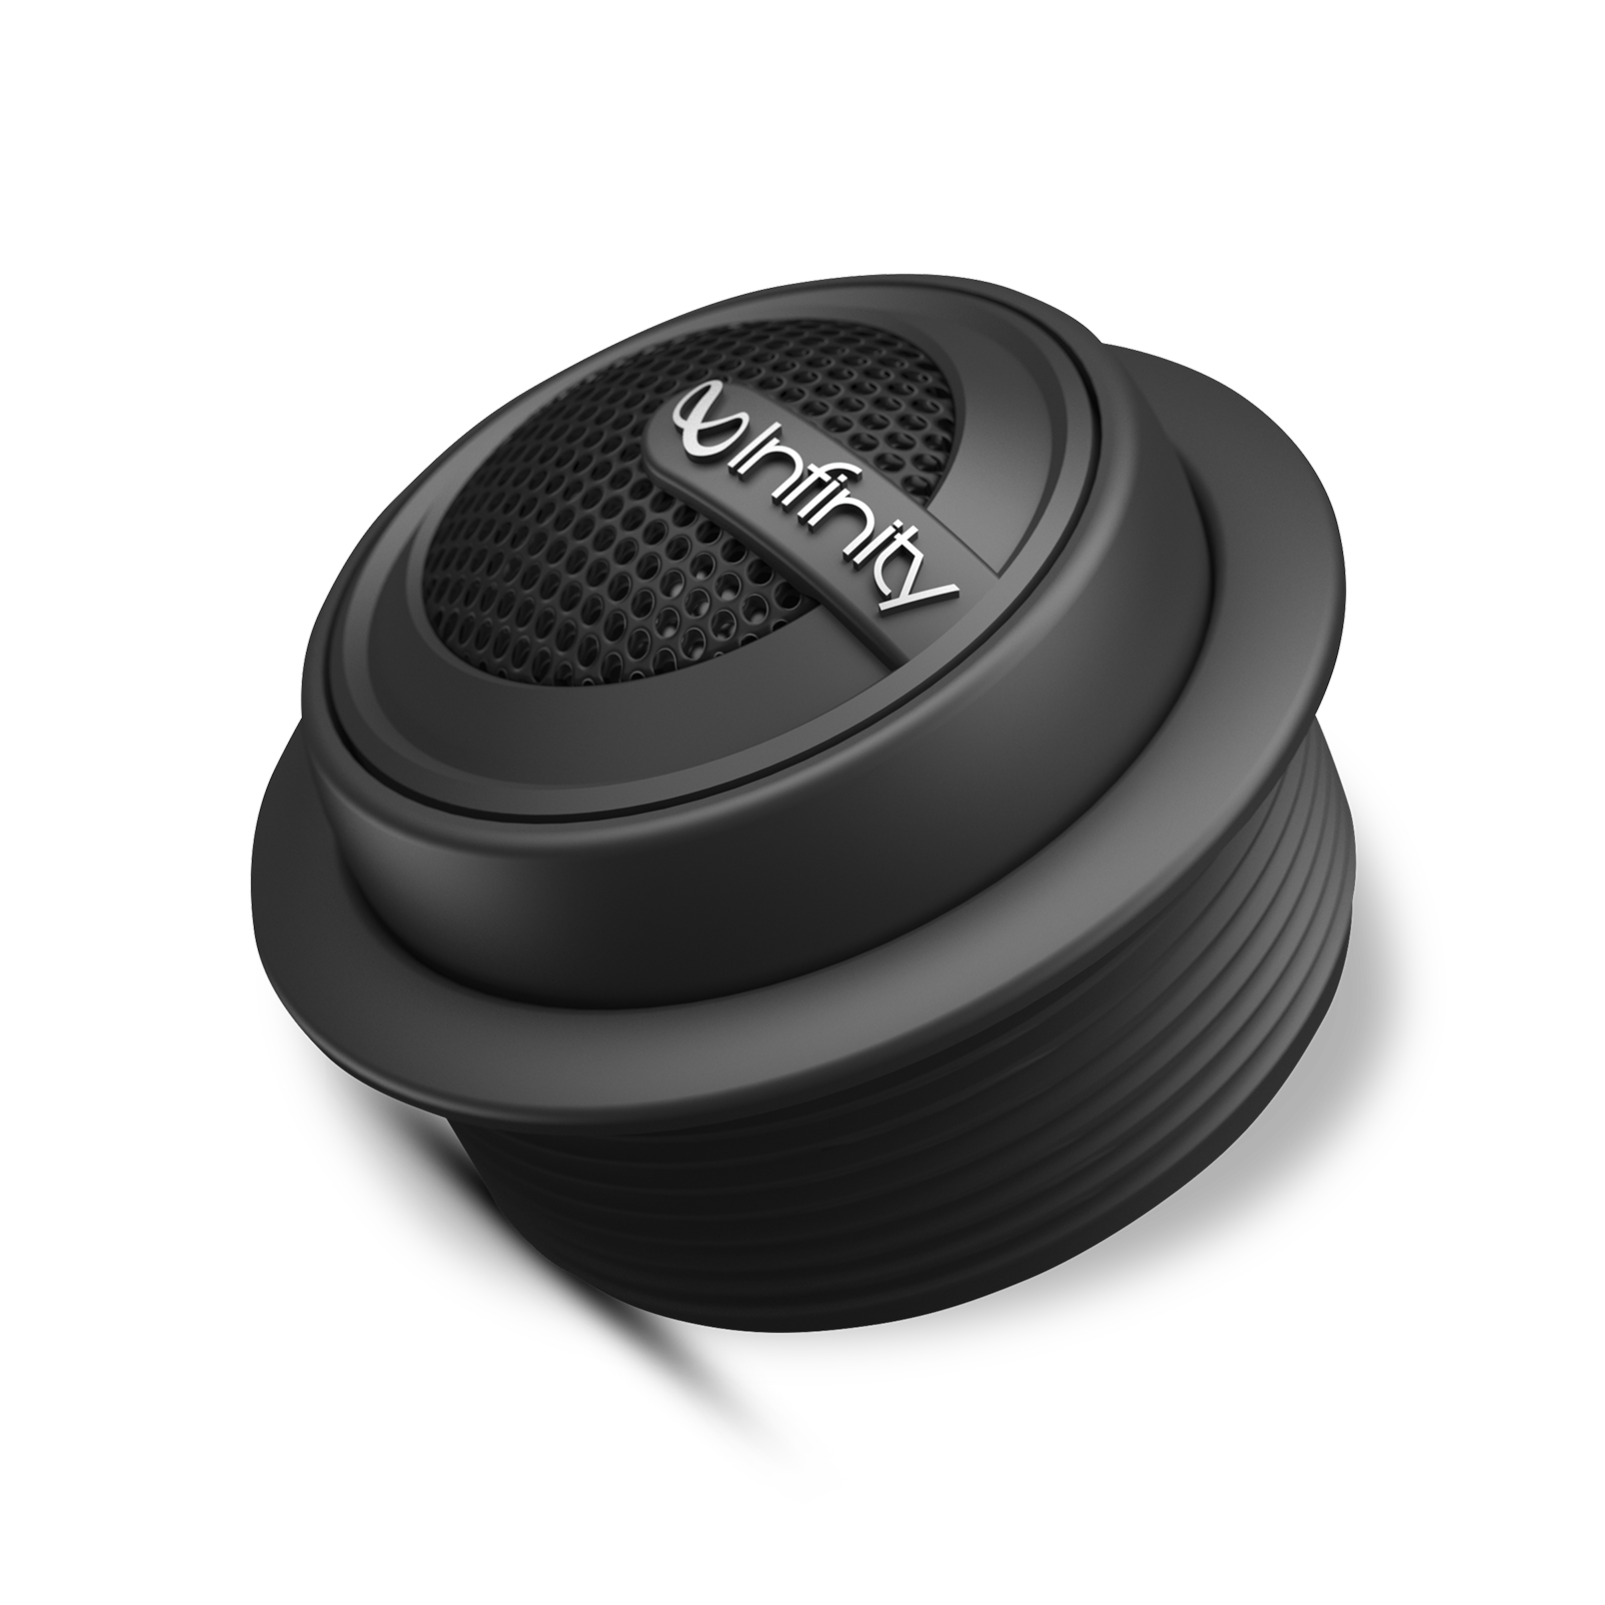 Reference 075tx - Black - 3/4" (19mm) stand-alone component tweeter with passive crossover network - Hero